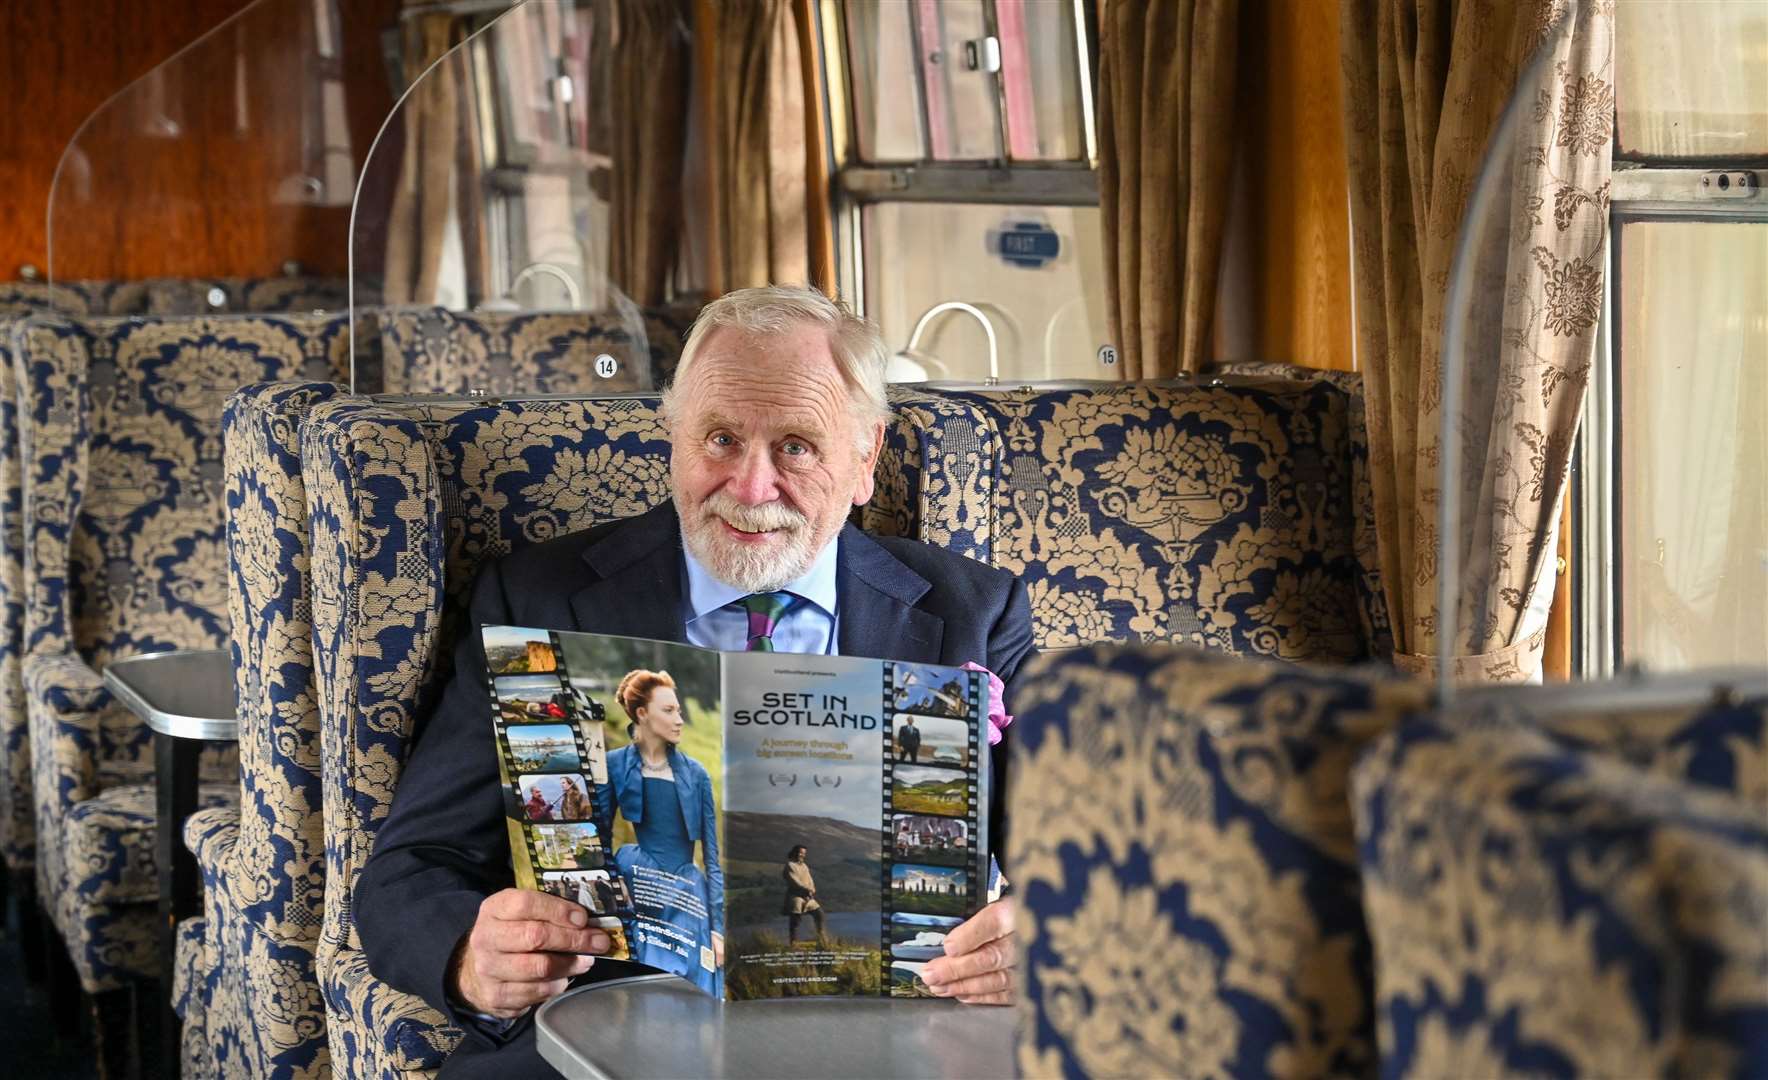 Scottish acting legend, James Cosmo, has spoken of the "magical quality' of films shot in Scotland as VisitScotland launches its new-look guide to big screen locations at Bo'ness and Kinneil Railway, near Falkirk.